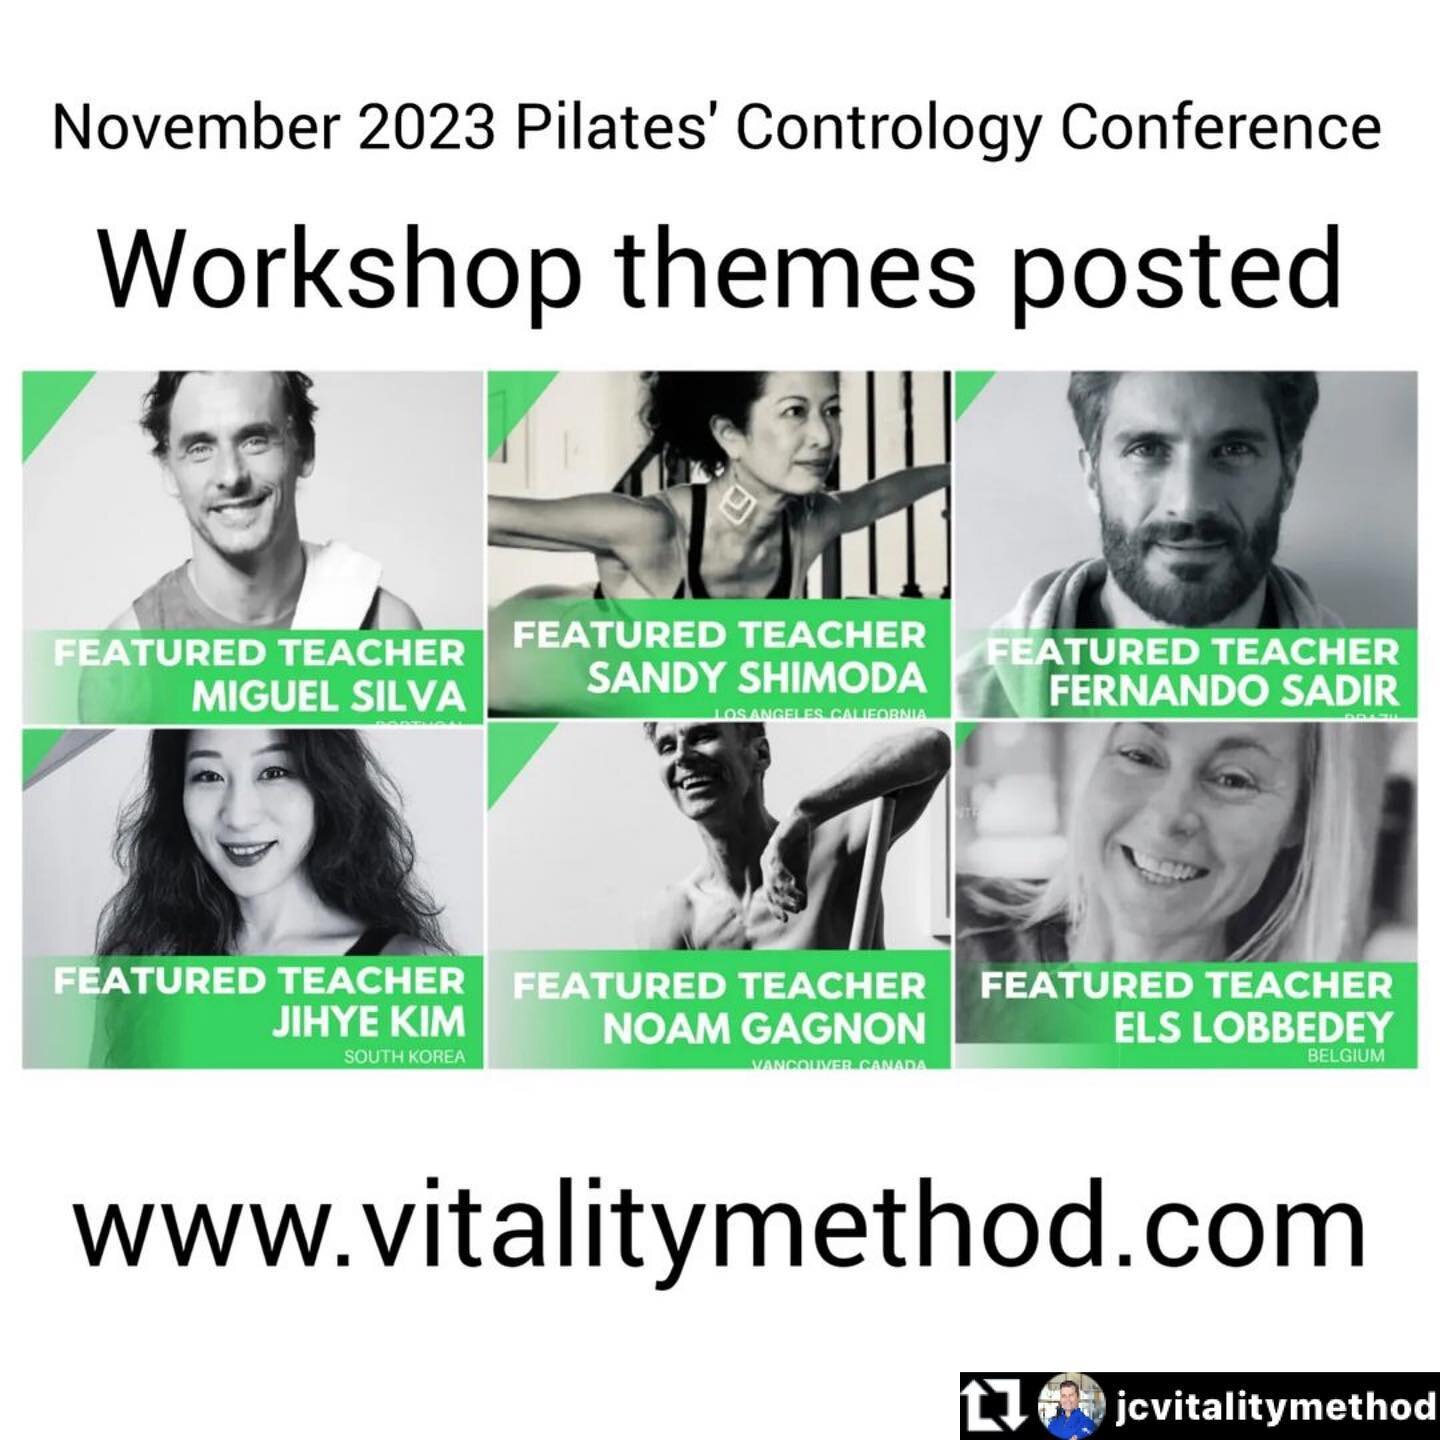 Conference themes and hotels have been added to www.vitalitymethod.com
This event will be epic!
Register now for huge early discount package pricing (highly recommended for the best experience) or choose individual workshops.

#vitalitymethod #pilate